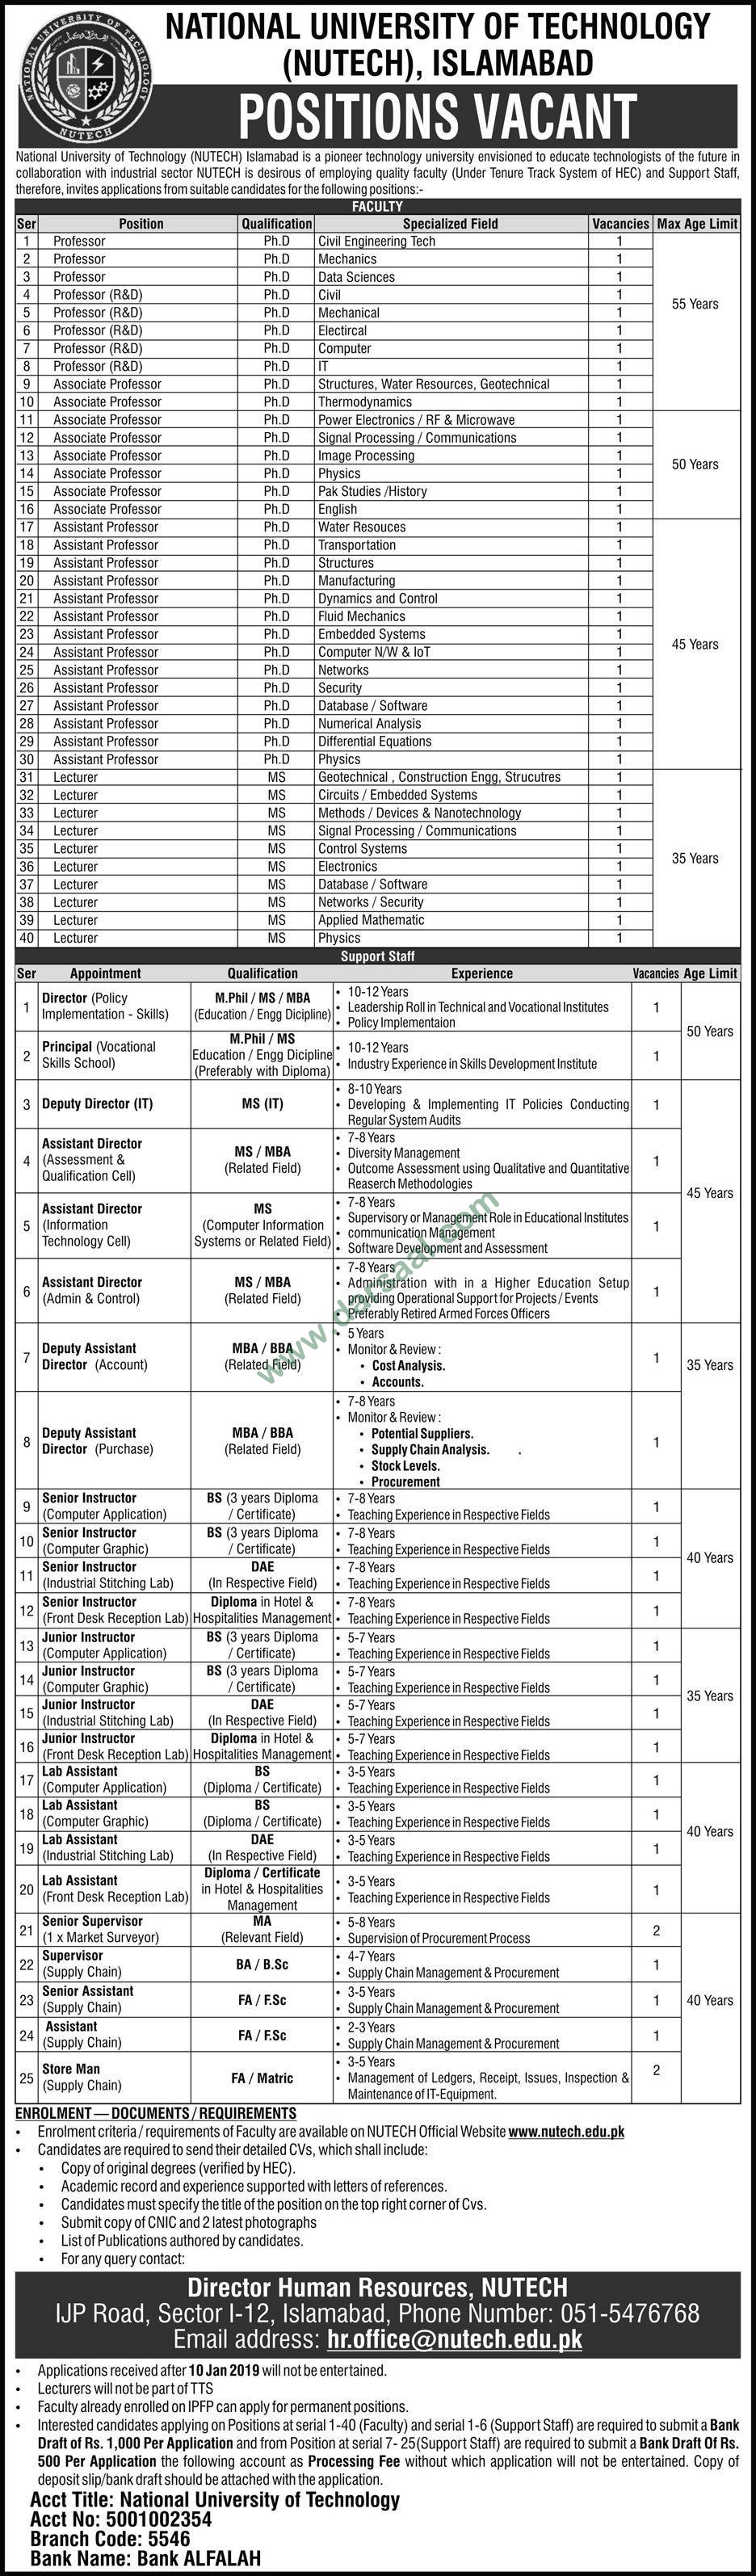 Supervisor Jobs in National University of Technology in Islamabad - Dec 24, 2018